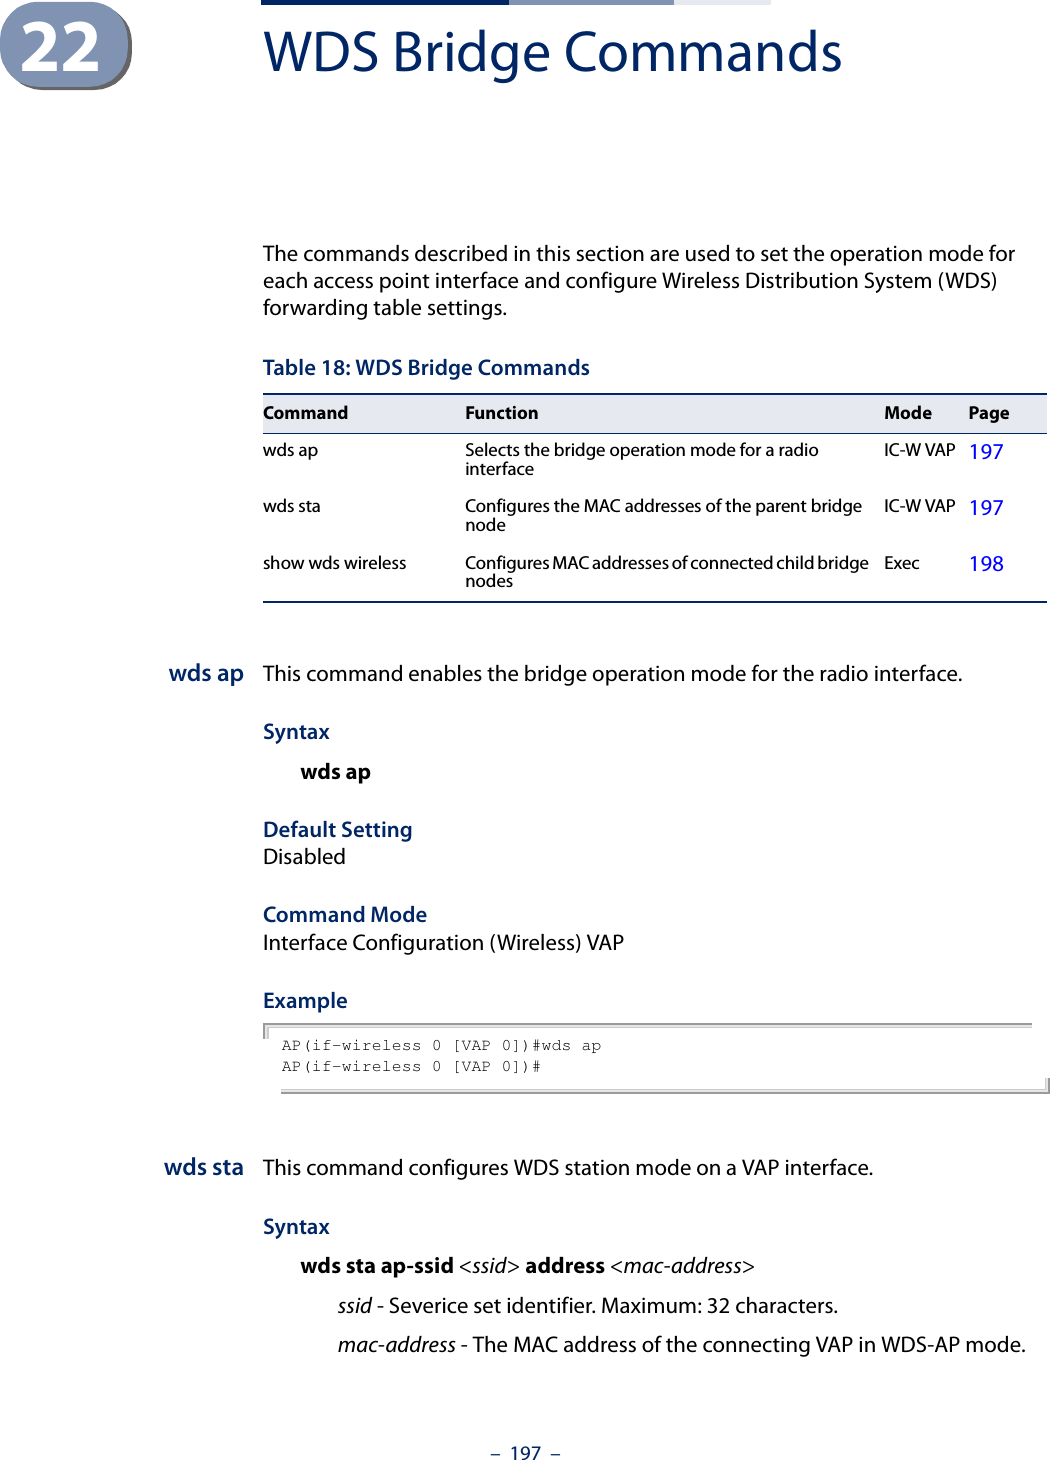 –  197  –22 WDS Bridge CommandsThe commands described in this section are used to set the operation mode for each access point interface and configure Wireless Distribution System (WDS) forwarding table settings. wds ap This command enables the bridge operation mode for the radio interface.Syntaxwds apDefault Setting DisabledCommand Mode Interface Configuration (Wireless) VAPExample AP(if-wireless 0 [VAP 0])#wds apAP(if-wireless 0 [VAP 0])#wds sta This command configures WDS station mode on a VAP interface.Syntaxwds sta ap-ssid &lt;ssid&gt; address &lt;mac-address&gt;ssid - Severice set identifier. Maximum: 32 characters.mac-address - The MAC address of the connecting VAP in WDS-AP mode.Table 18: WDS Bridge CommandsCommand Function Mode Pagewds ap Selects the bridge operation mode for a radio interface IC-W VAP 197wds sta Configures the MAC addresses of the parent bridge node IC-W VAP 197show wds wireless Configures MAC addresses of connected child bridge nodes Exec 198